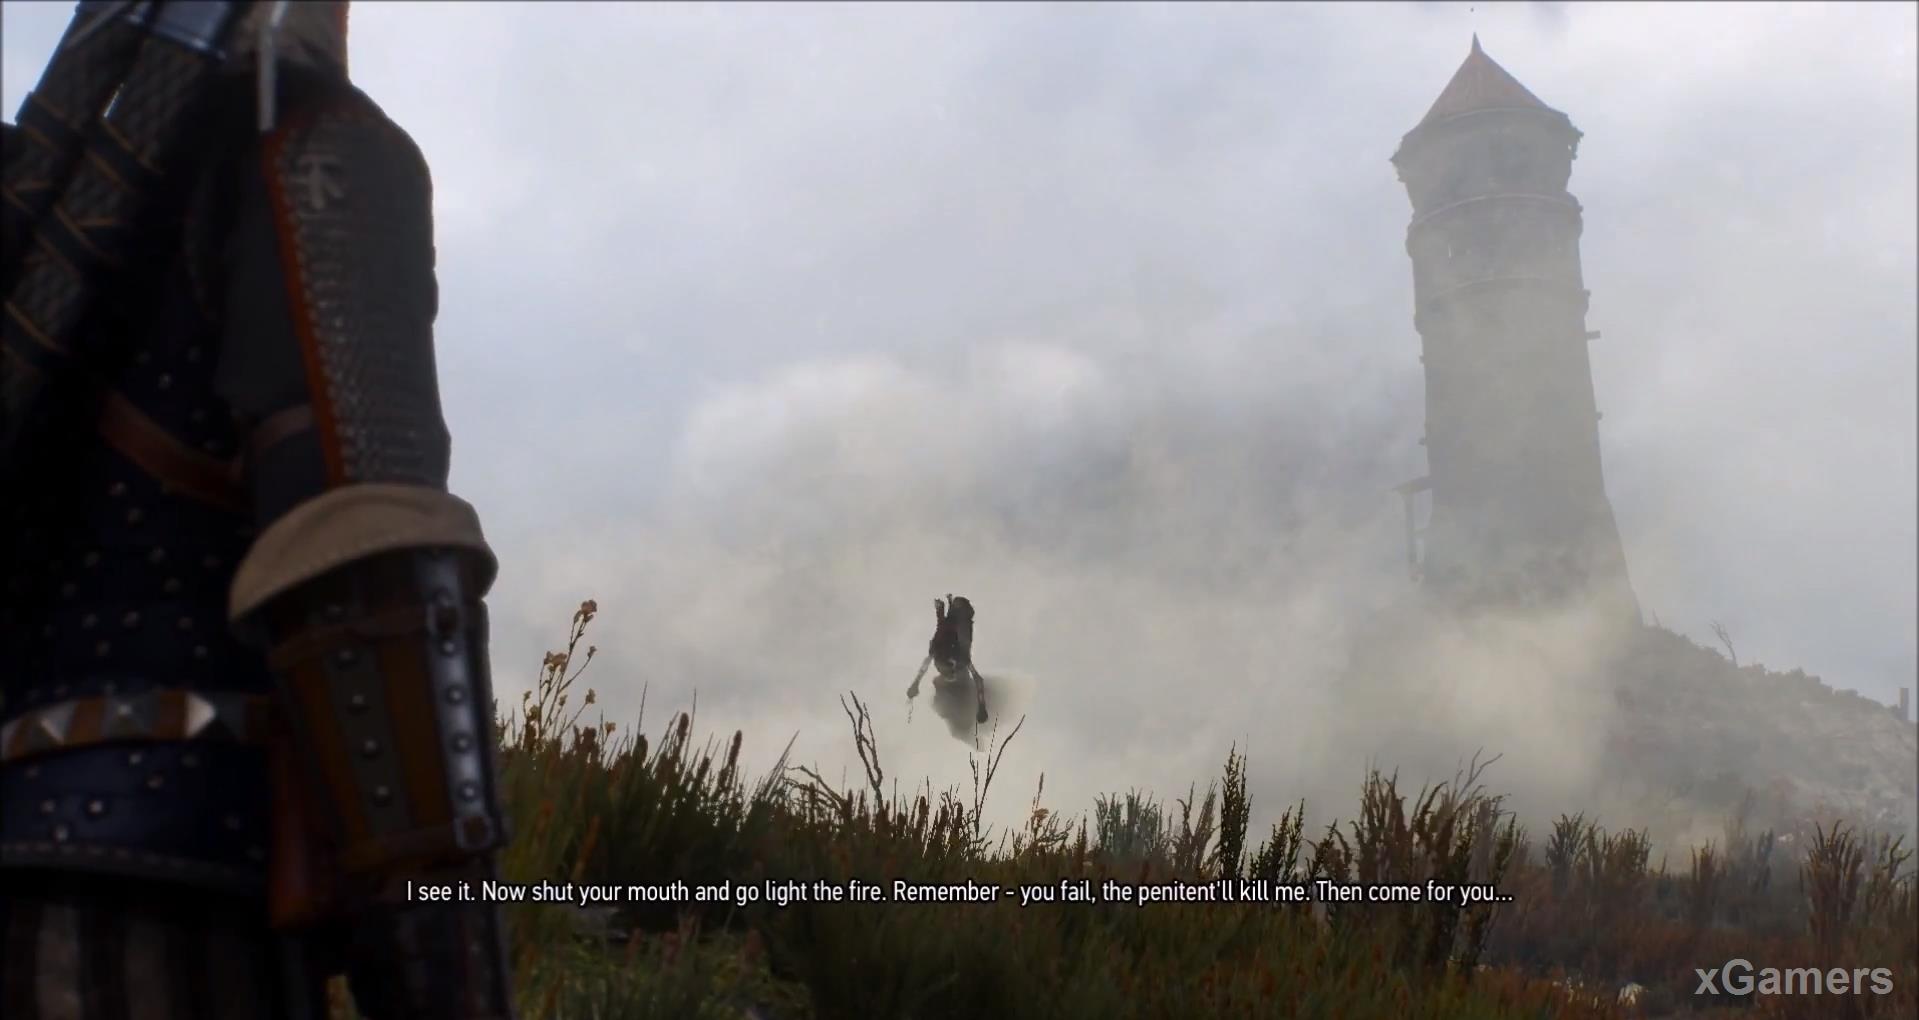 the caretaker and Geralt go to the lighthouse and on their way becomes - Penitent